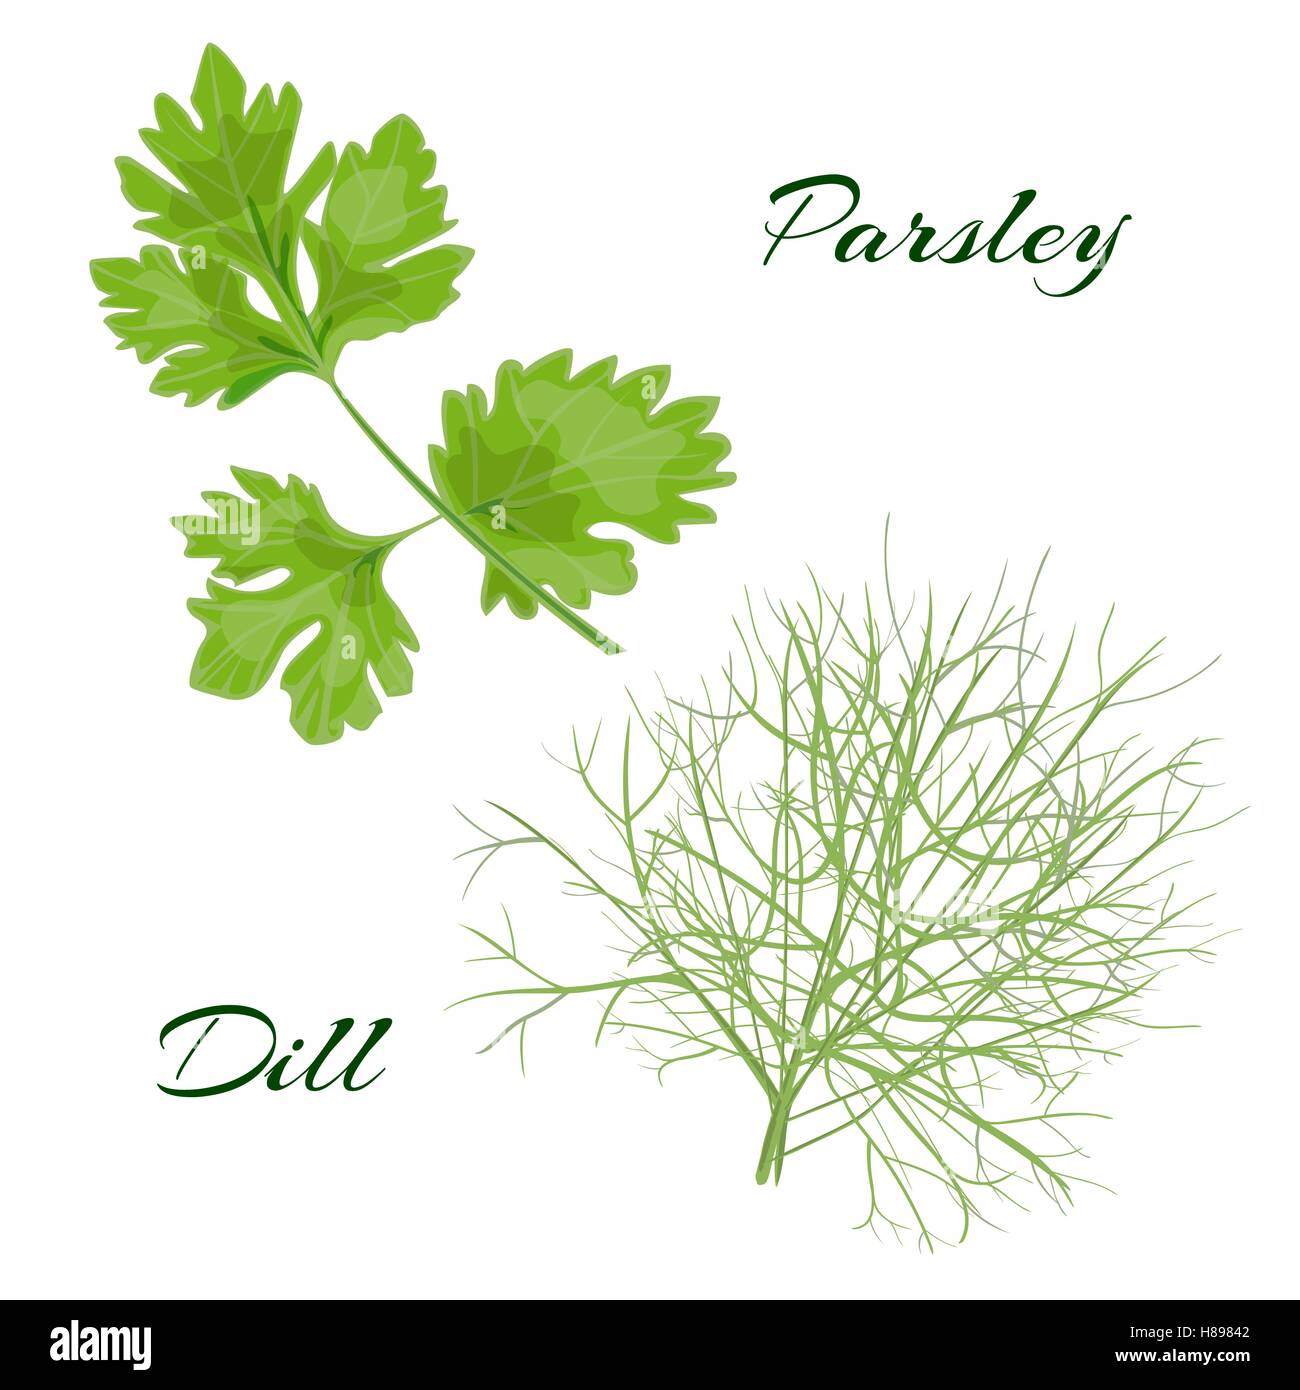 Parsley and dill. fresh cooking herbs. Vector illustration Stock Vector